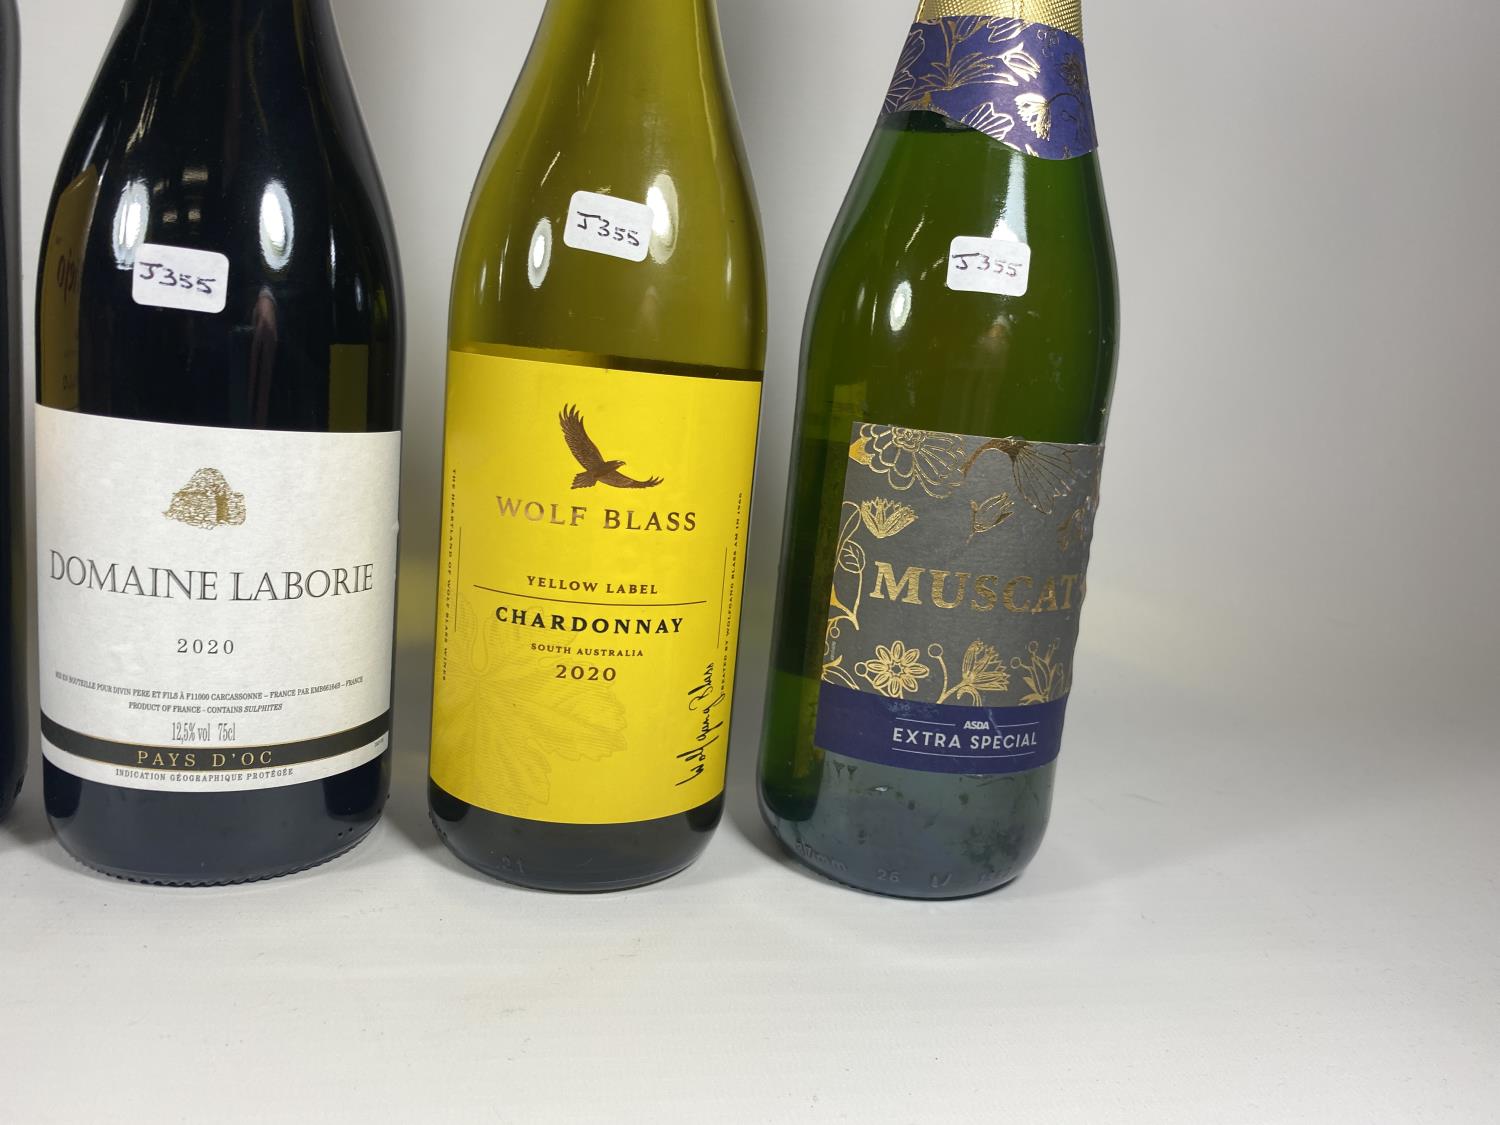 5 X MIXED 75CL BOTTLES - PROSECCO, SAMPO VIEJO, DOMAINE LABORIE, WOLF BLASS CHARDONNAY & MUSCAT - Image 3 of 3